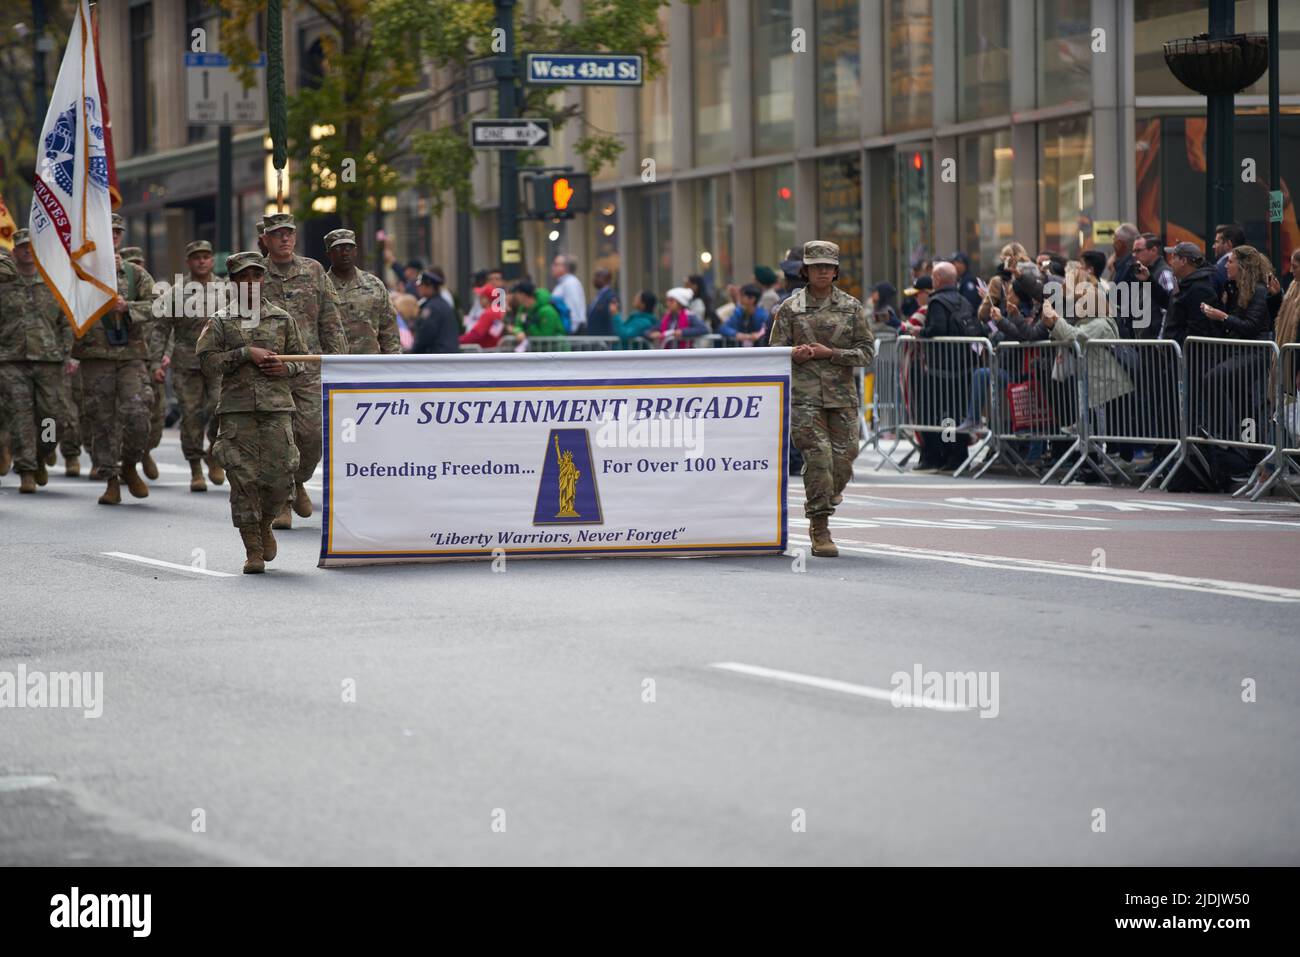 Manhattan, New York,USA - November 11. 2019: 77th Sustainment Brigade Banner. Soldiers marching on Fifth Avenue in NYC. US Military Infantry Stock Photo